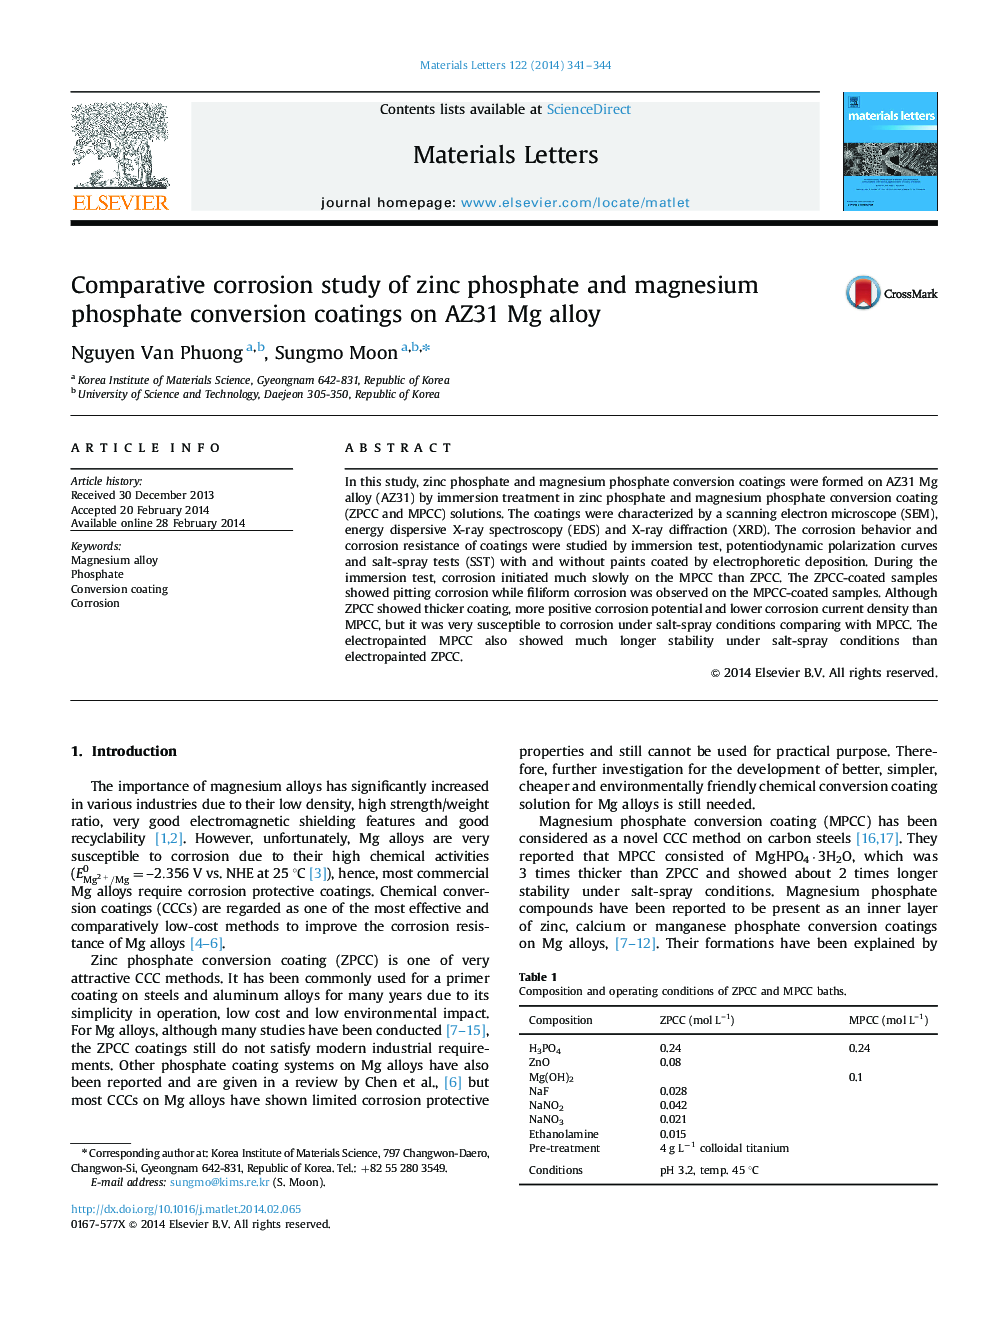 Comparative corrosion study of zinc phosphate and magnesium phosphate conversion coatings on AZ31 Mg alloy